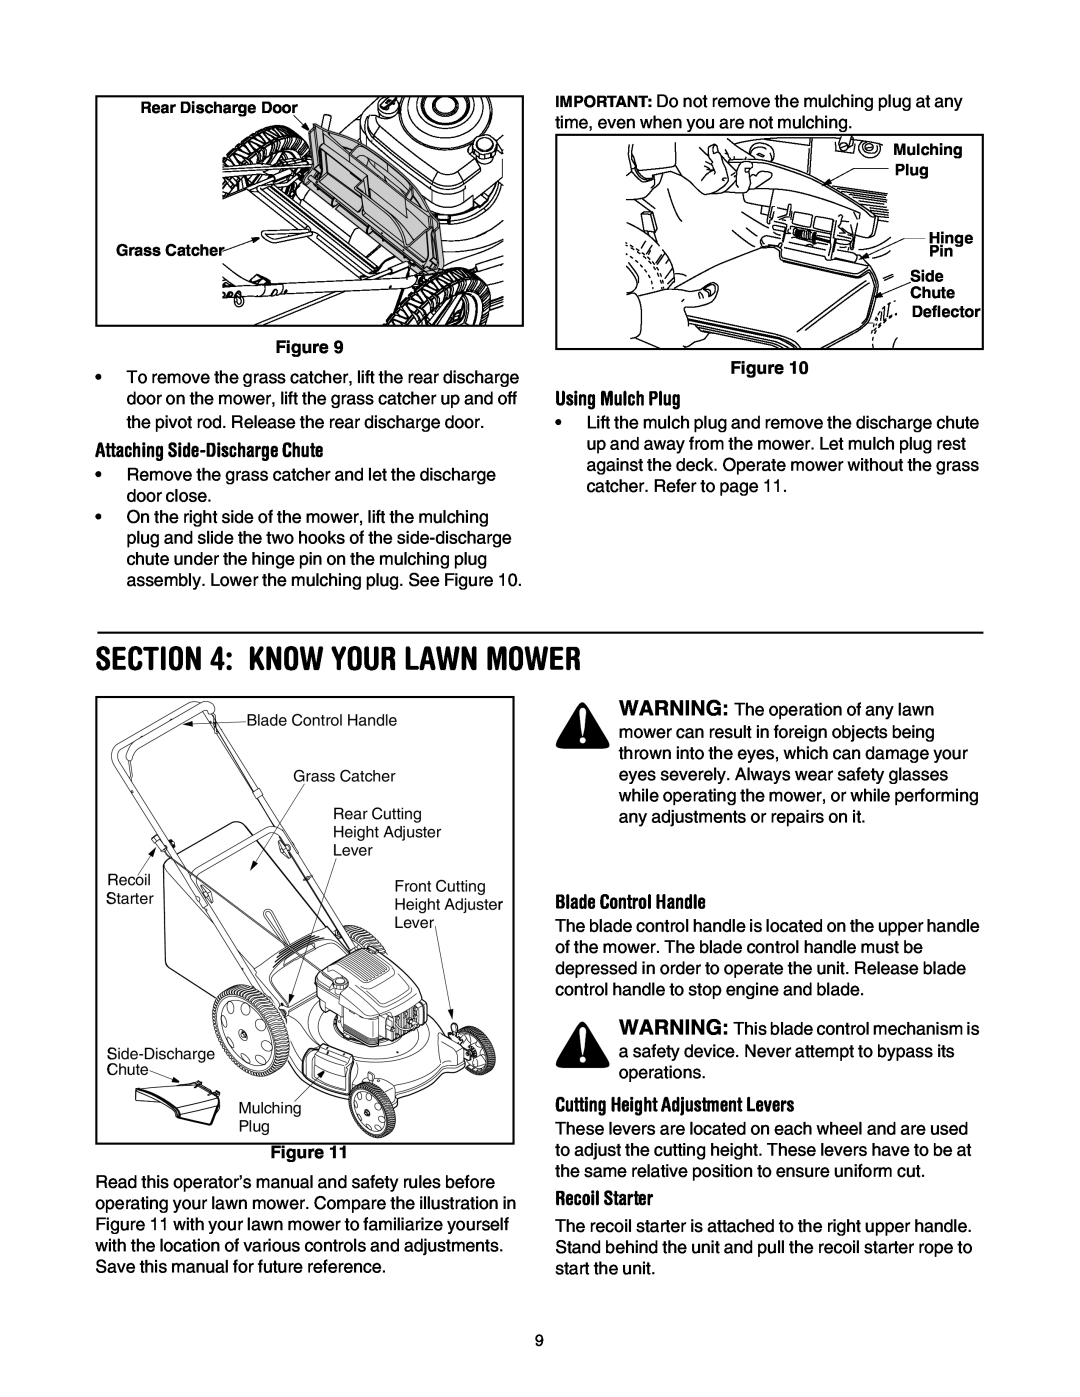 Troy-Bilt 549 Know Your Lawn Mower, Attaching Side-Discharge Chute, Using Mulch Plug, Blade Control Handle, Recoil Starter 